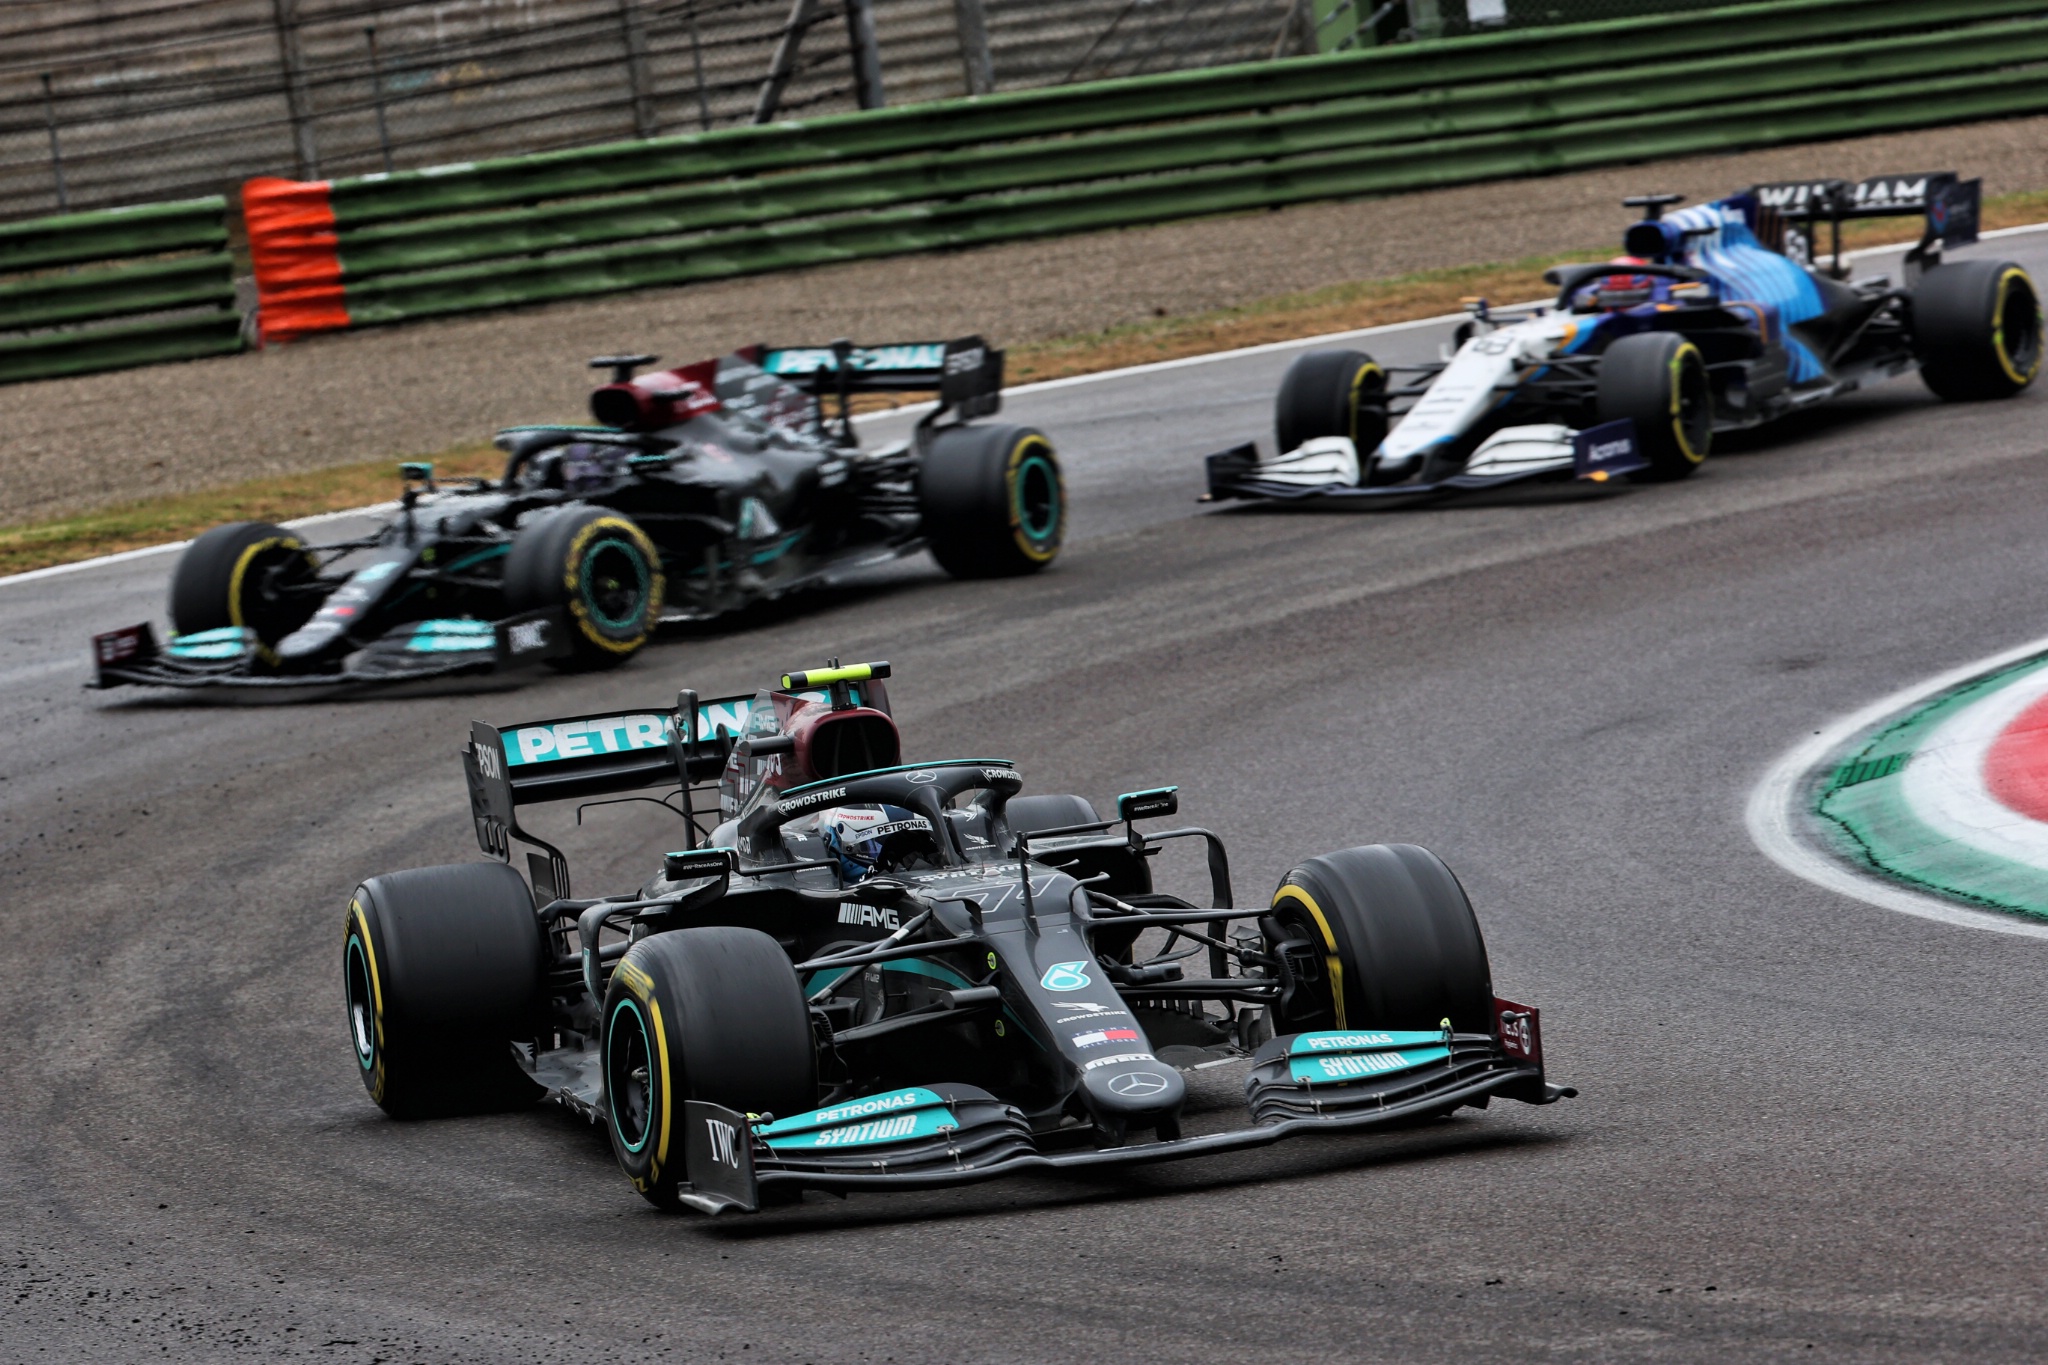 Valtteri Bottas (FIN) Mercedes AMG F1 W12 as Lewis Hamilton (GBR) Mercedes AMG F1 W12 runs off the circuit while attempting to lap George Russell (GBR) Williams Racing FW43B.